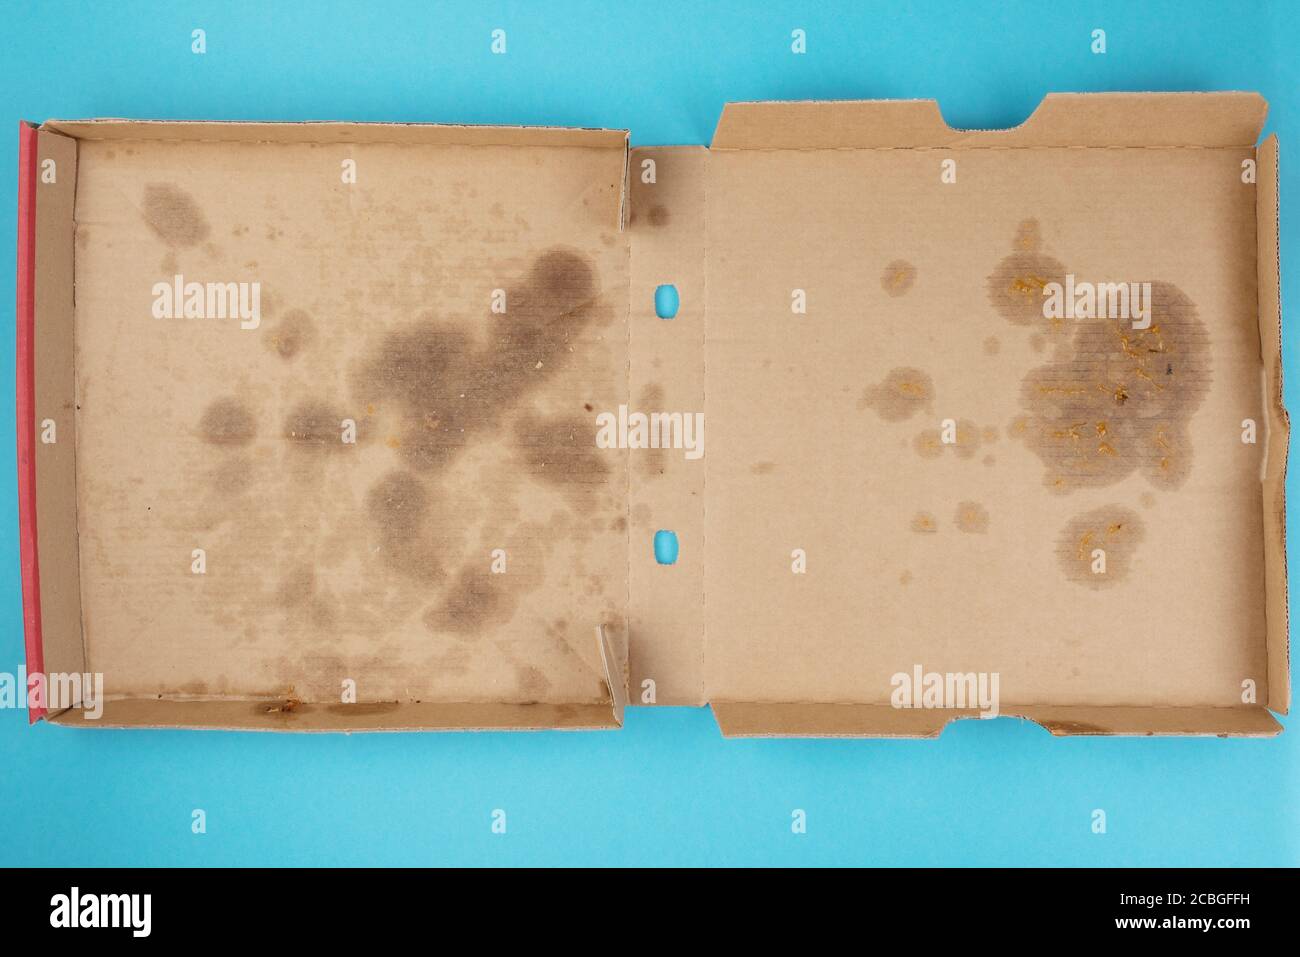 above view of greasy empty delivery pizza box on blue background Stock Photo